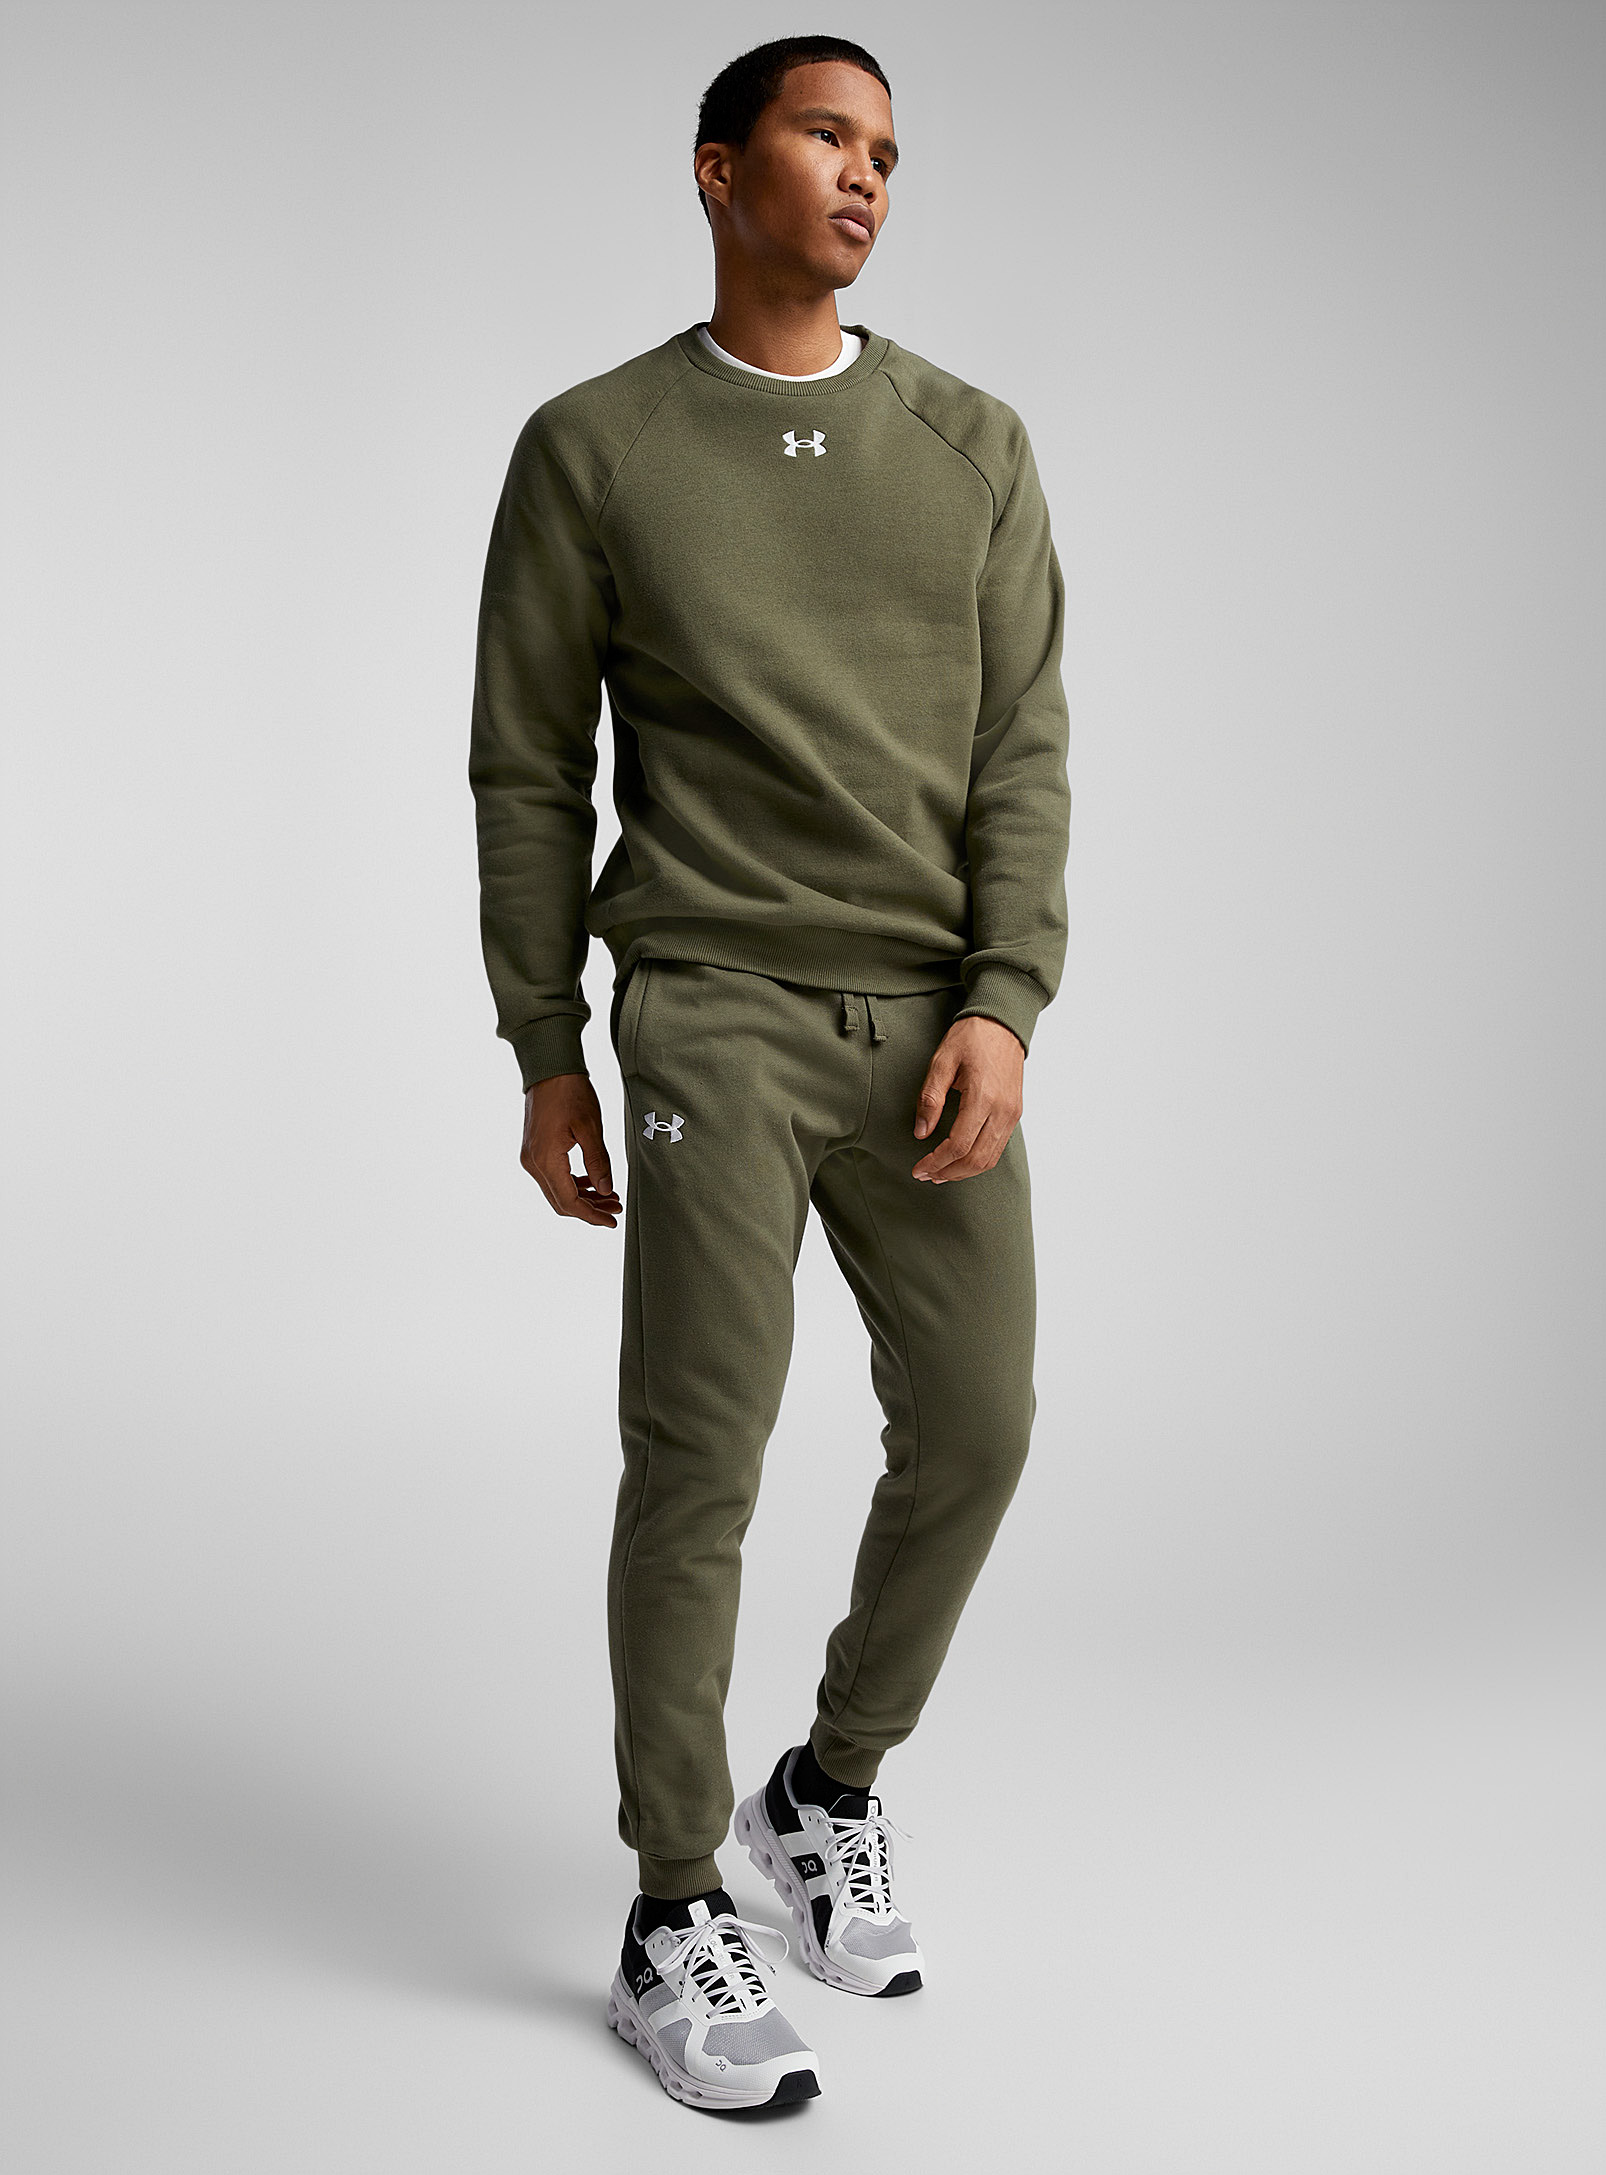 Under Armour Rival Fleece Essential Fleece Pant In Patterned Green